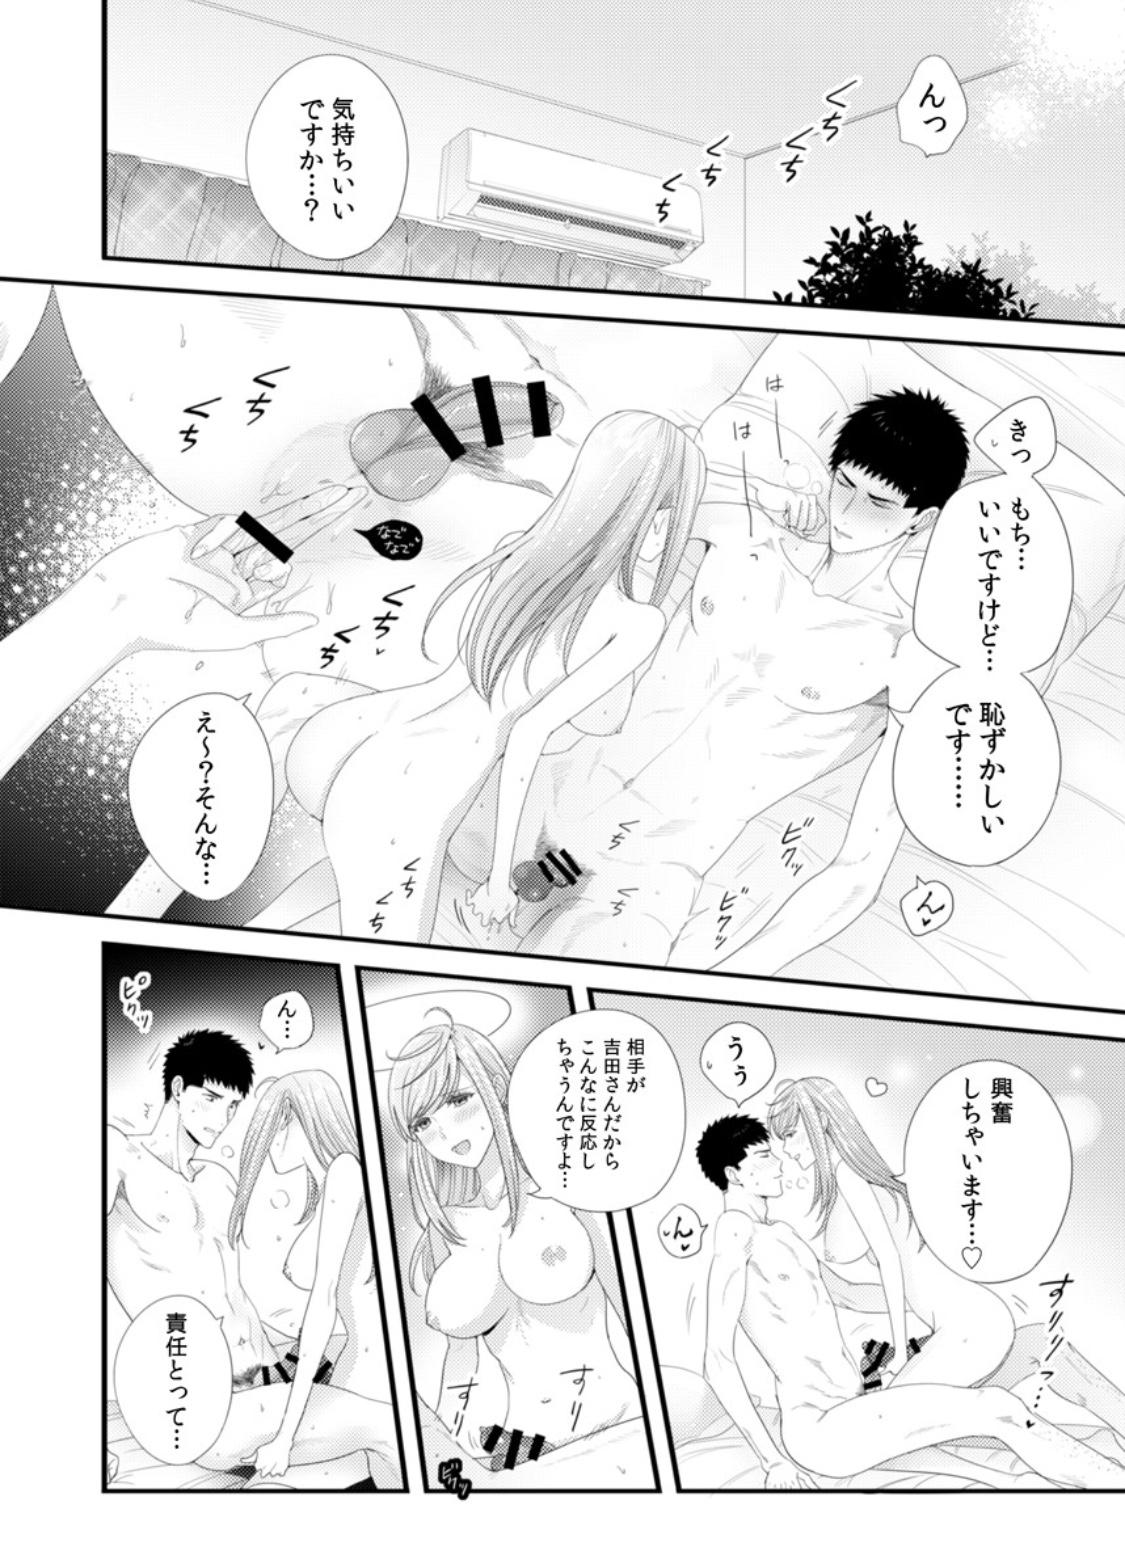 Please Let Me Hold You Futaba-San! Ch. 1+2 57